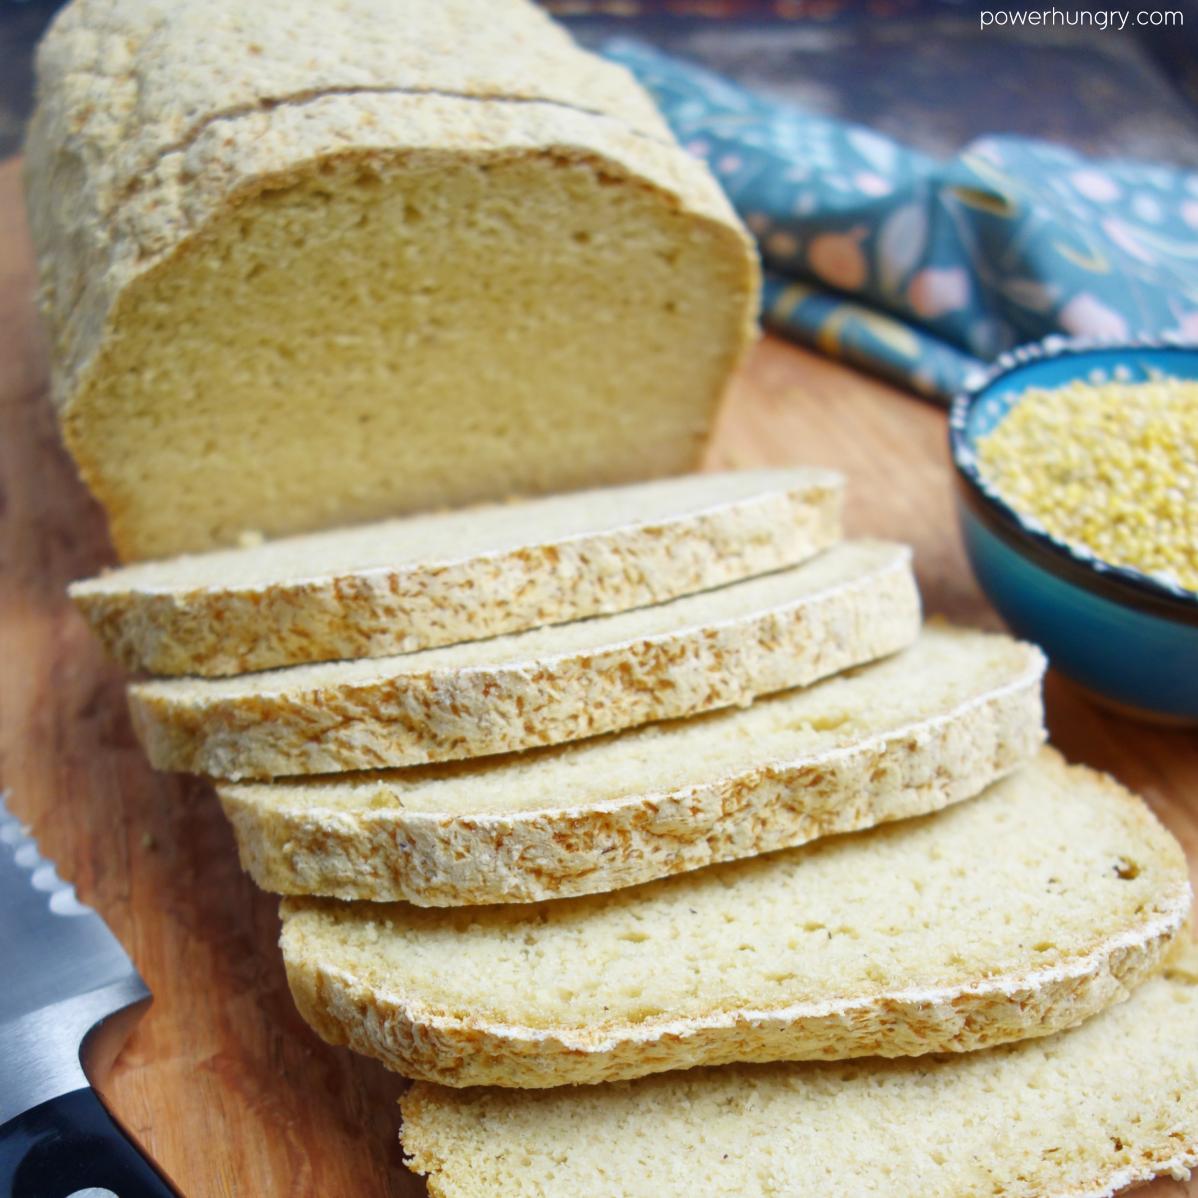  Fresh out of the oven, this dairy-free millet bread is a warm and comforting treat.